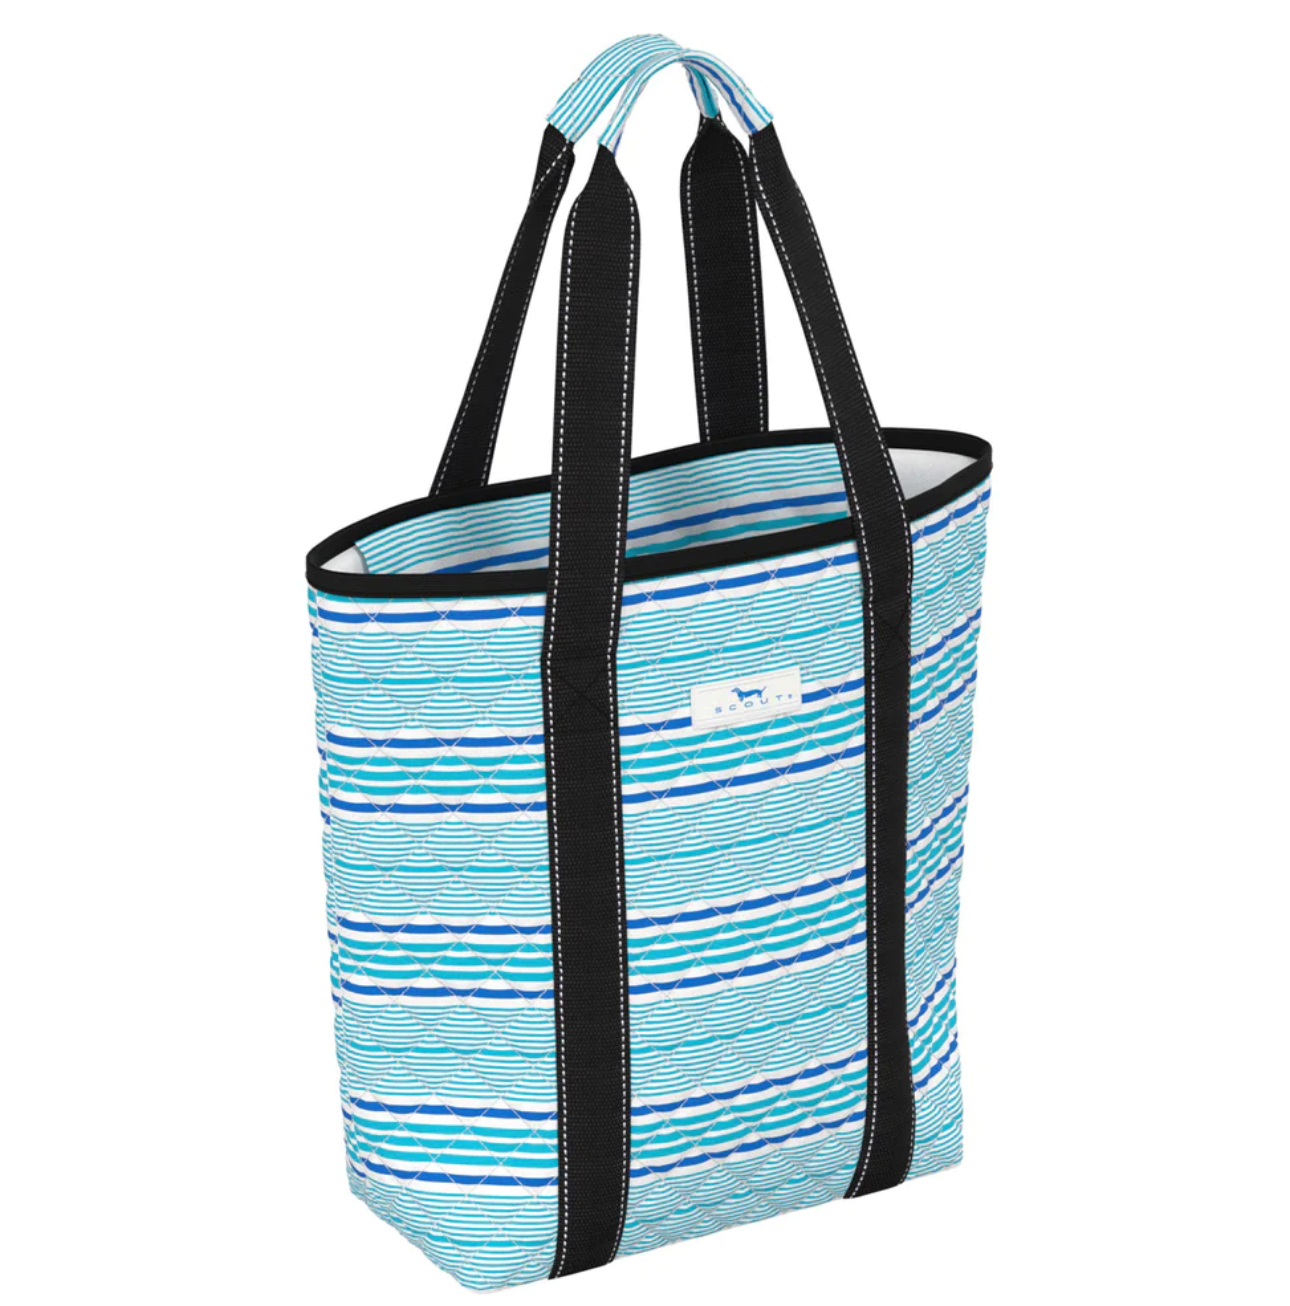 Scout Reese Bag Totes in Seas the Day at Wrapsody